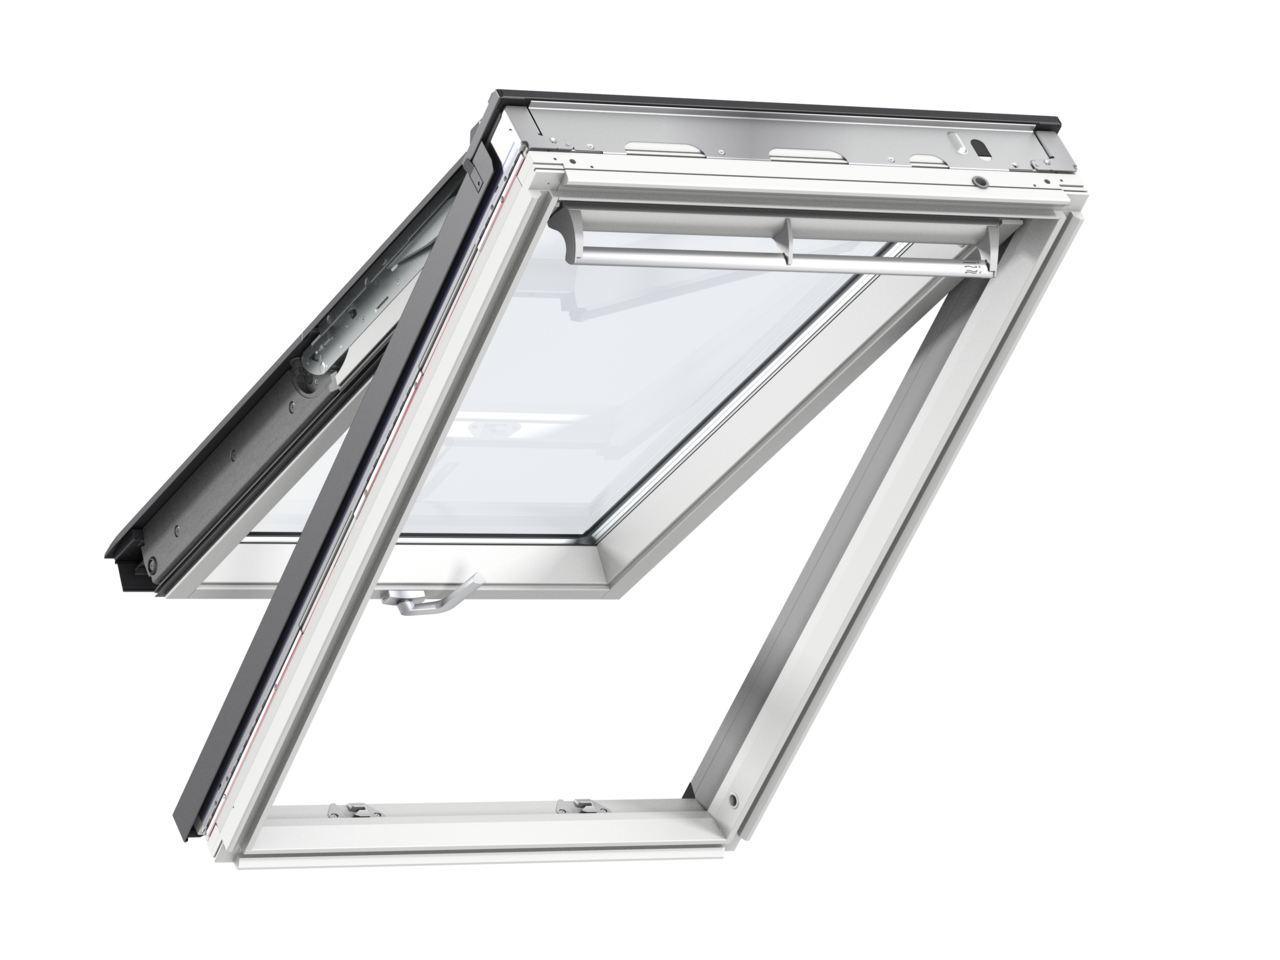 Velux GPL CK04 550 x 980mm Top Hung 66Pane Roof Window - White Painted